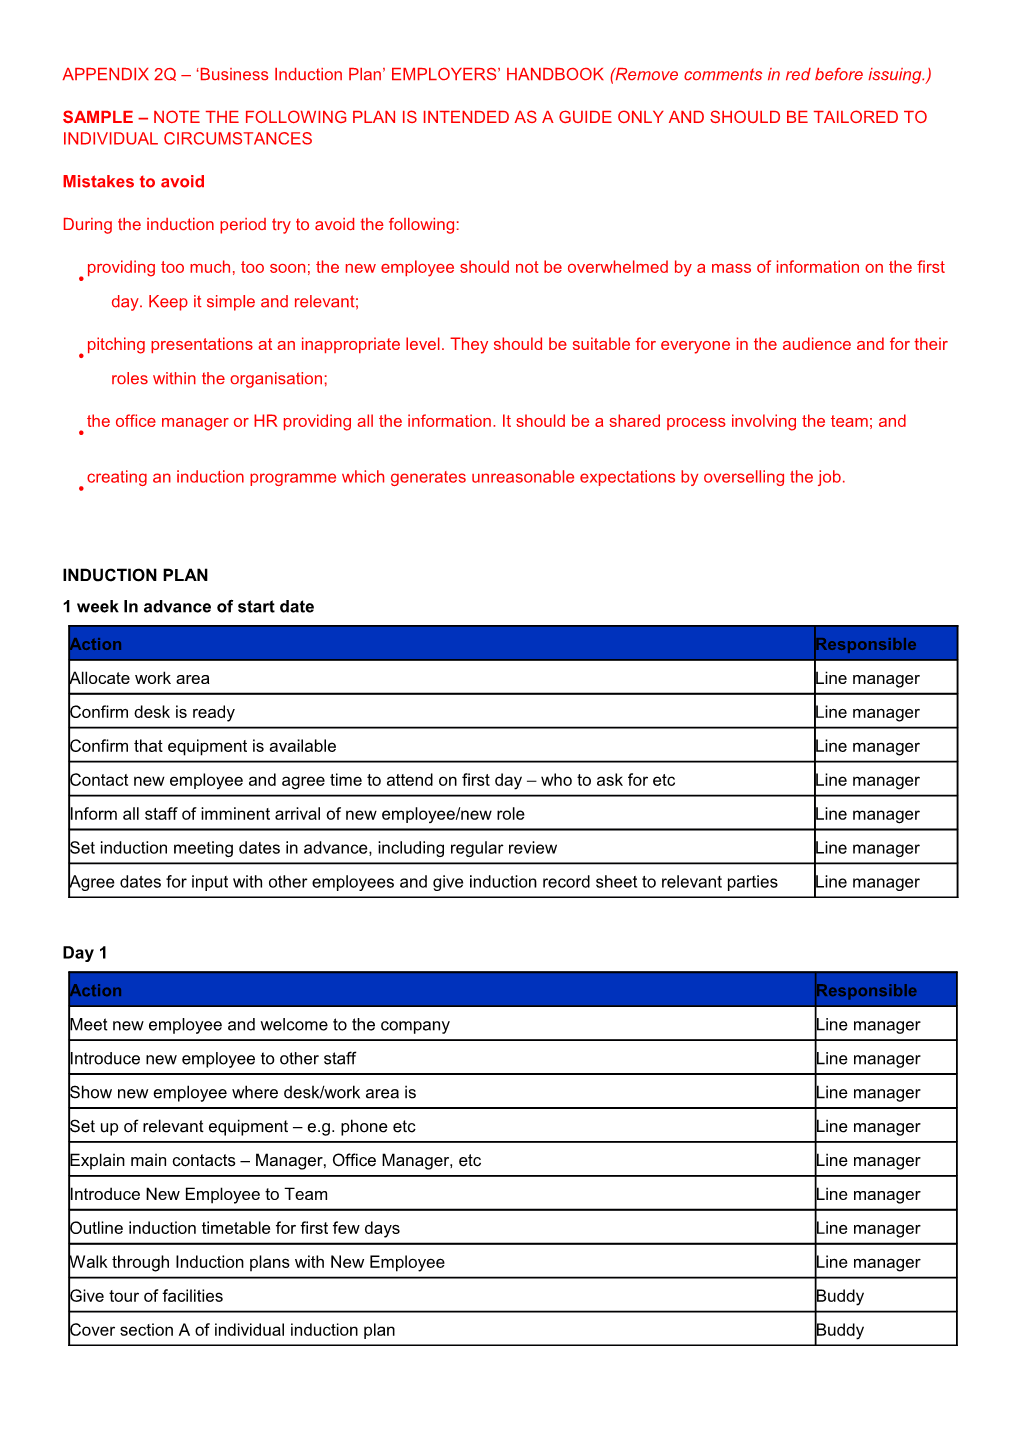 APPENDIX 2Q Business Induction Plan EMPLOYERS HANDBOOK (Remove Comments in Red Before Issuing.)